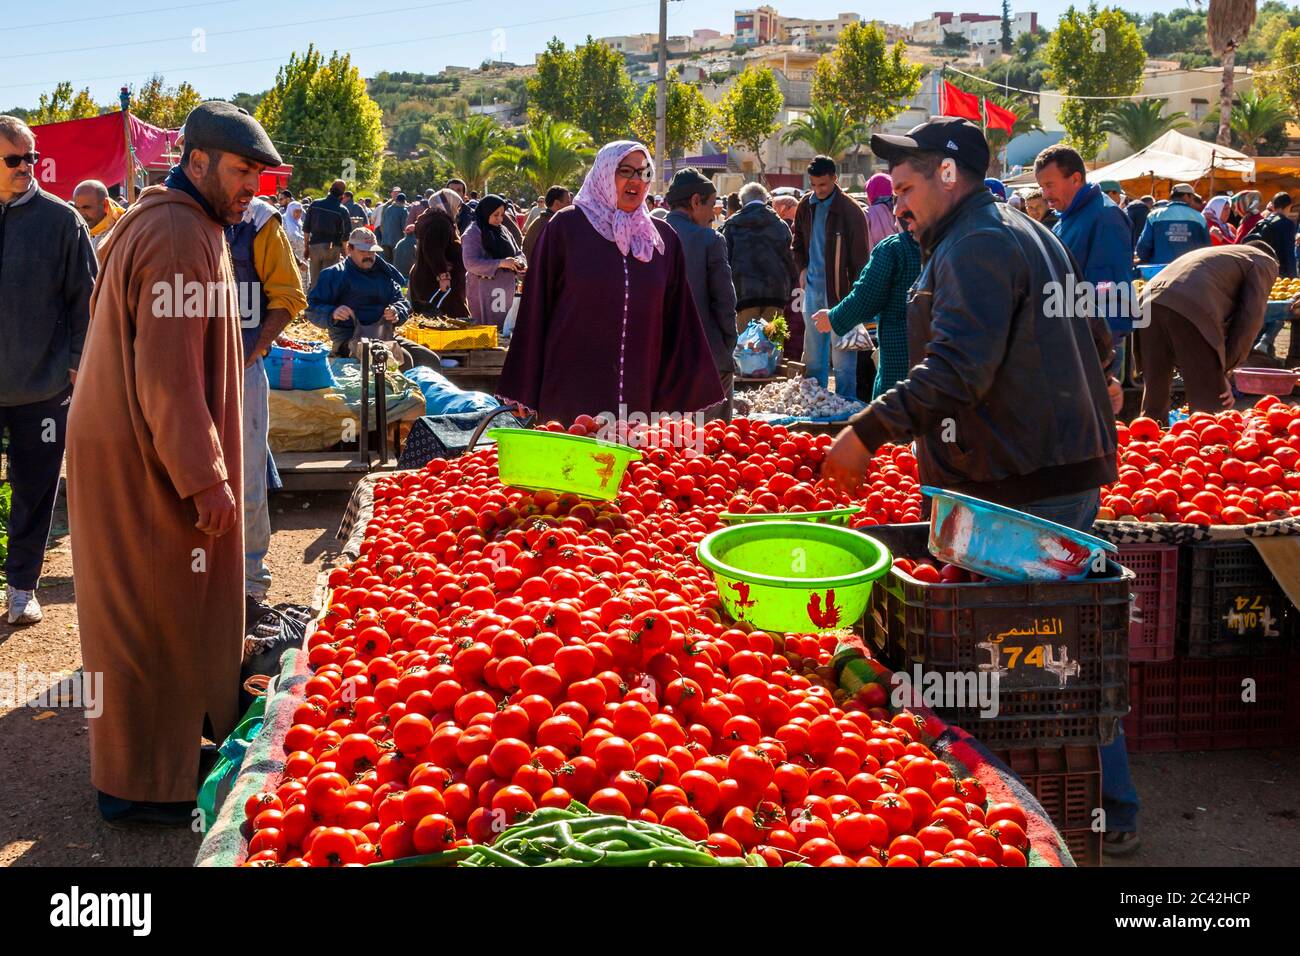 Impressions of Morocco: Tomatoes in the vegetable market Stock Photo